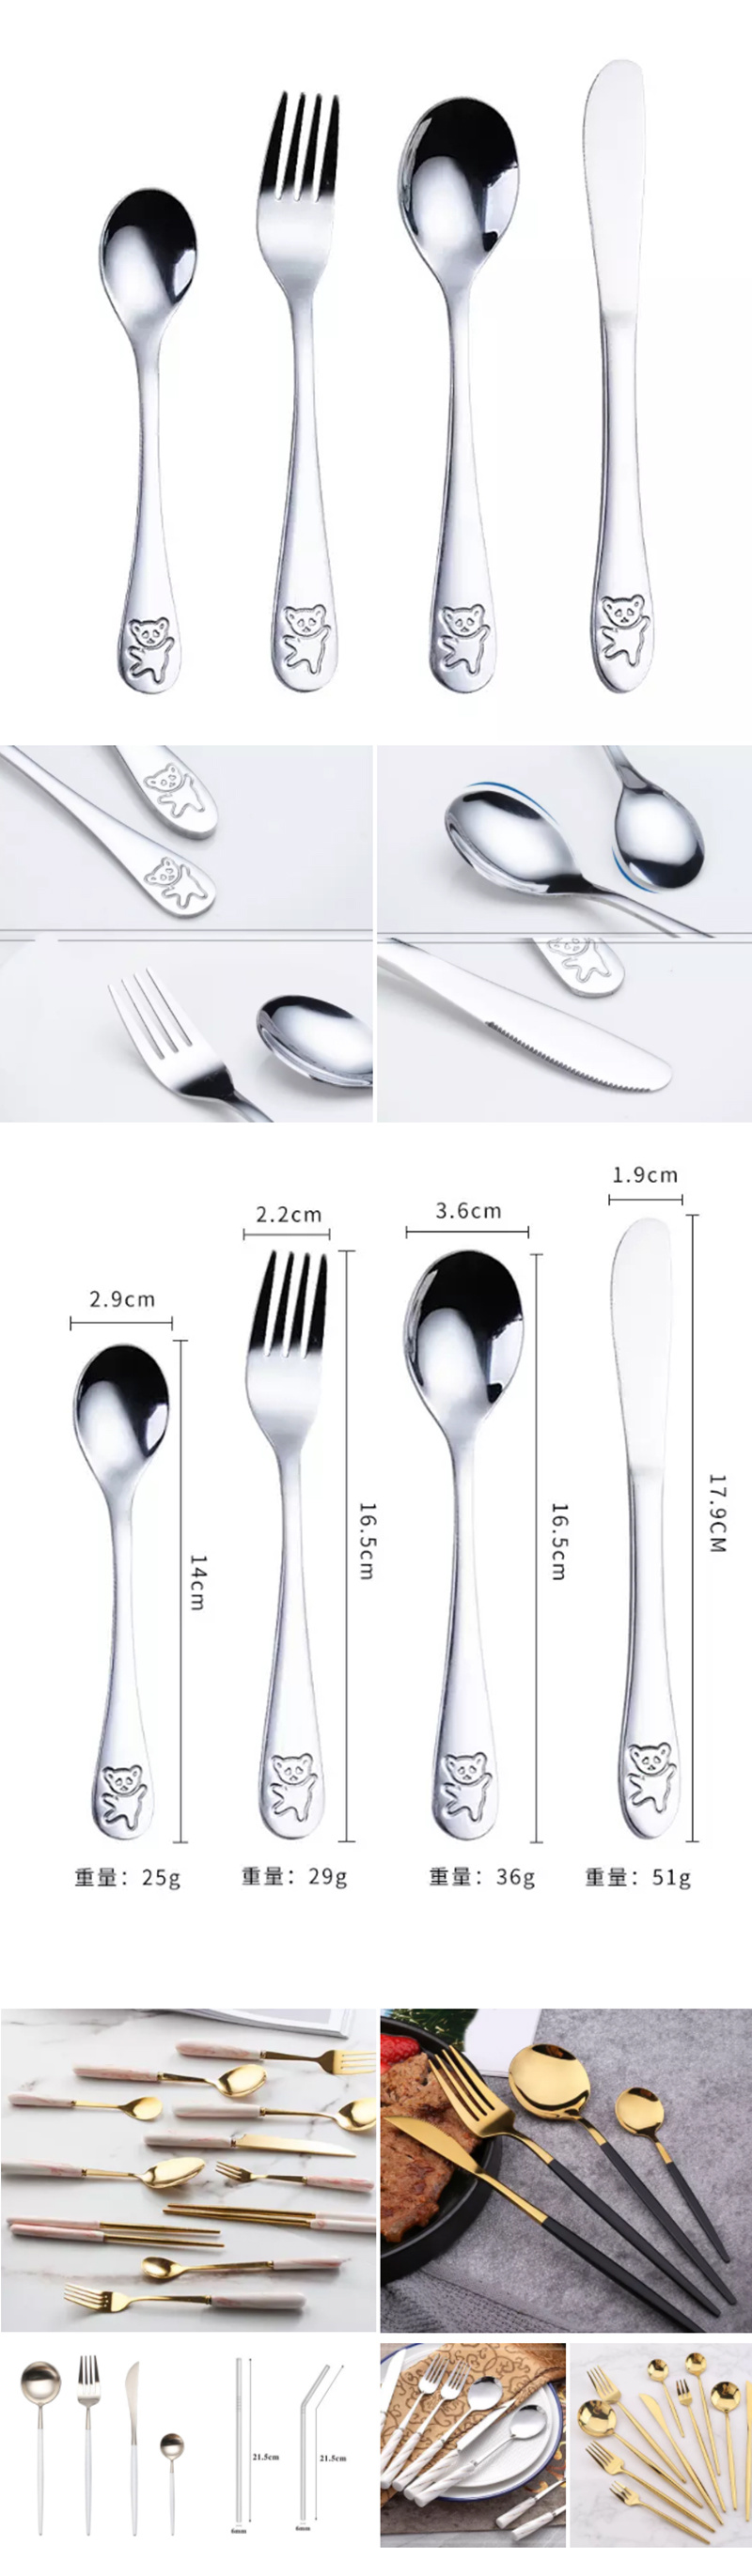 The New Children Cutlery Set Stainless Steel Cutlery